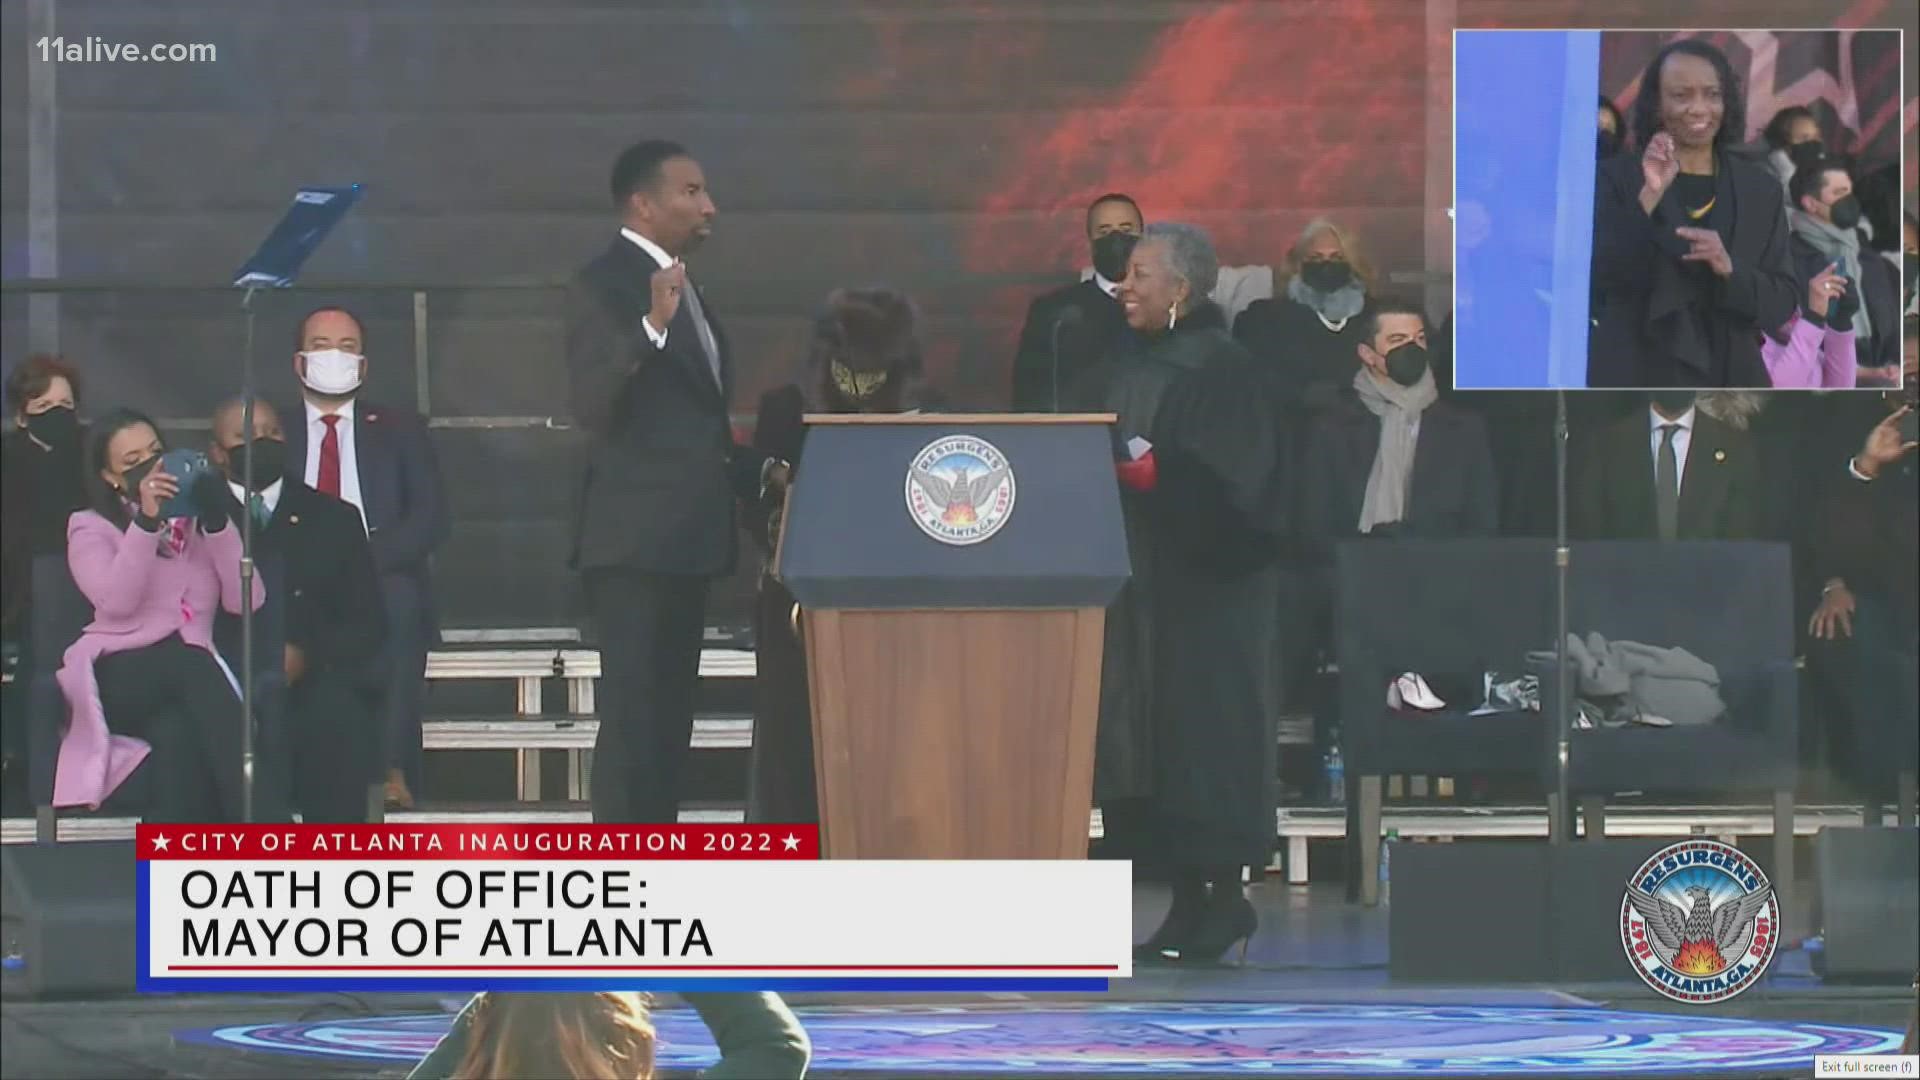 Andre Dickens was sworn in as Atlanta's 61st mayor on Jan. 3, 2022. Dickens talked about his future plans for the city at his inauguration.